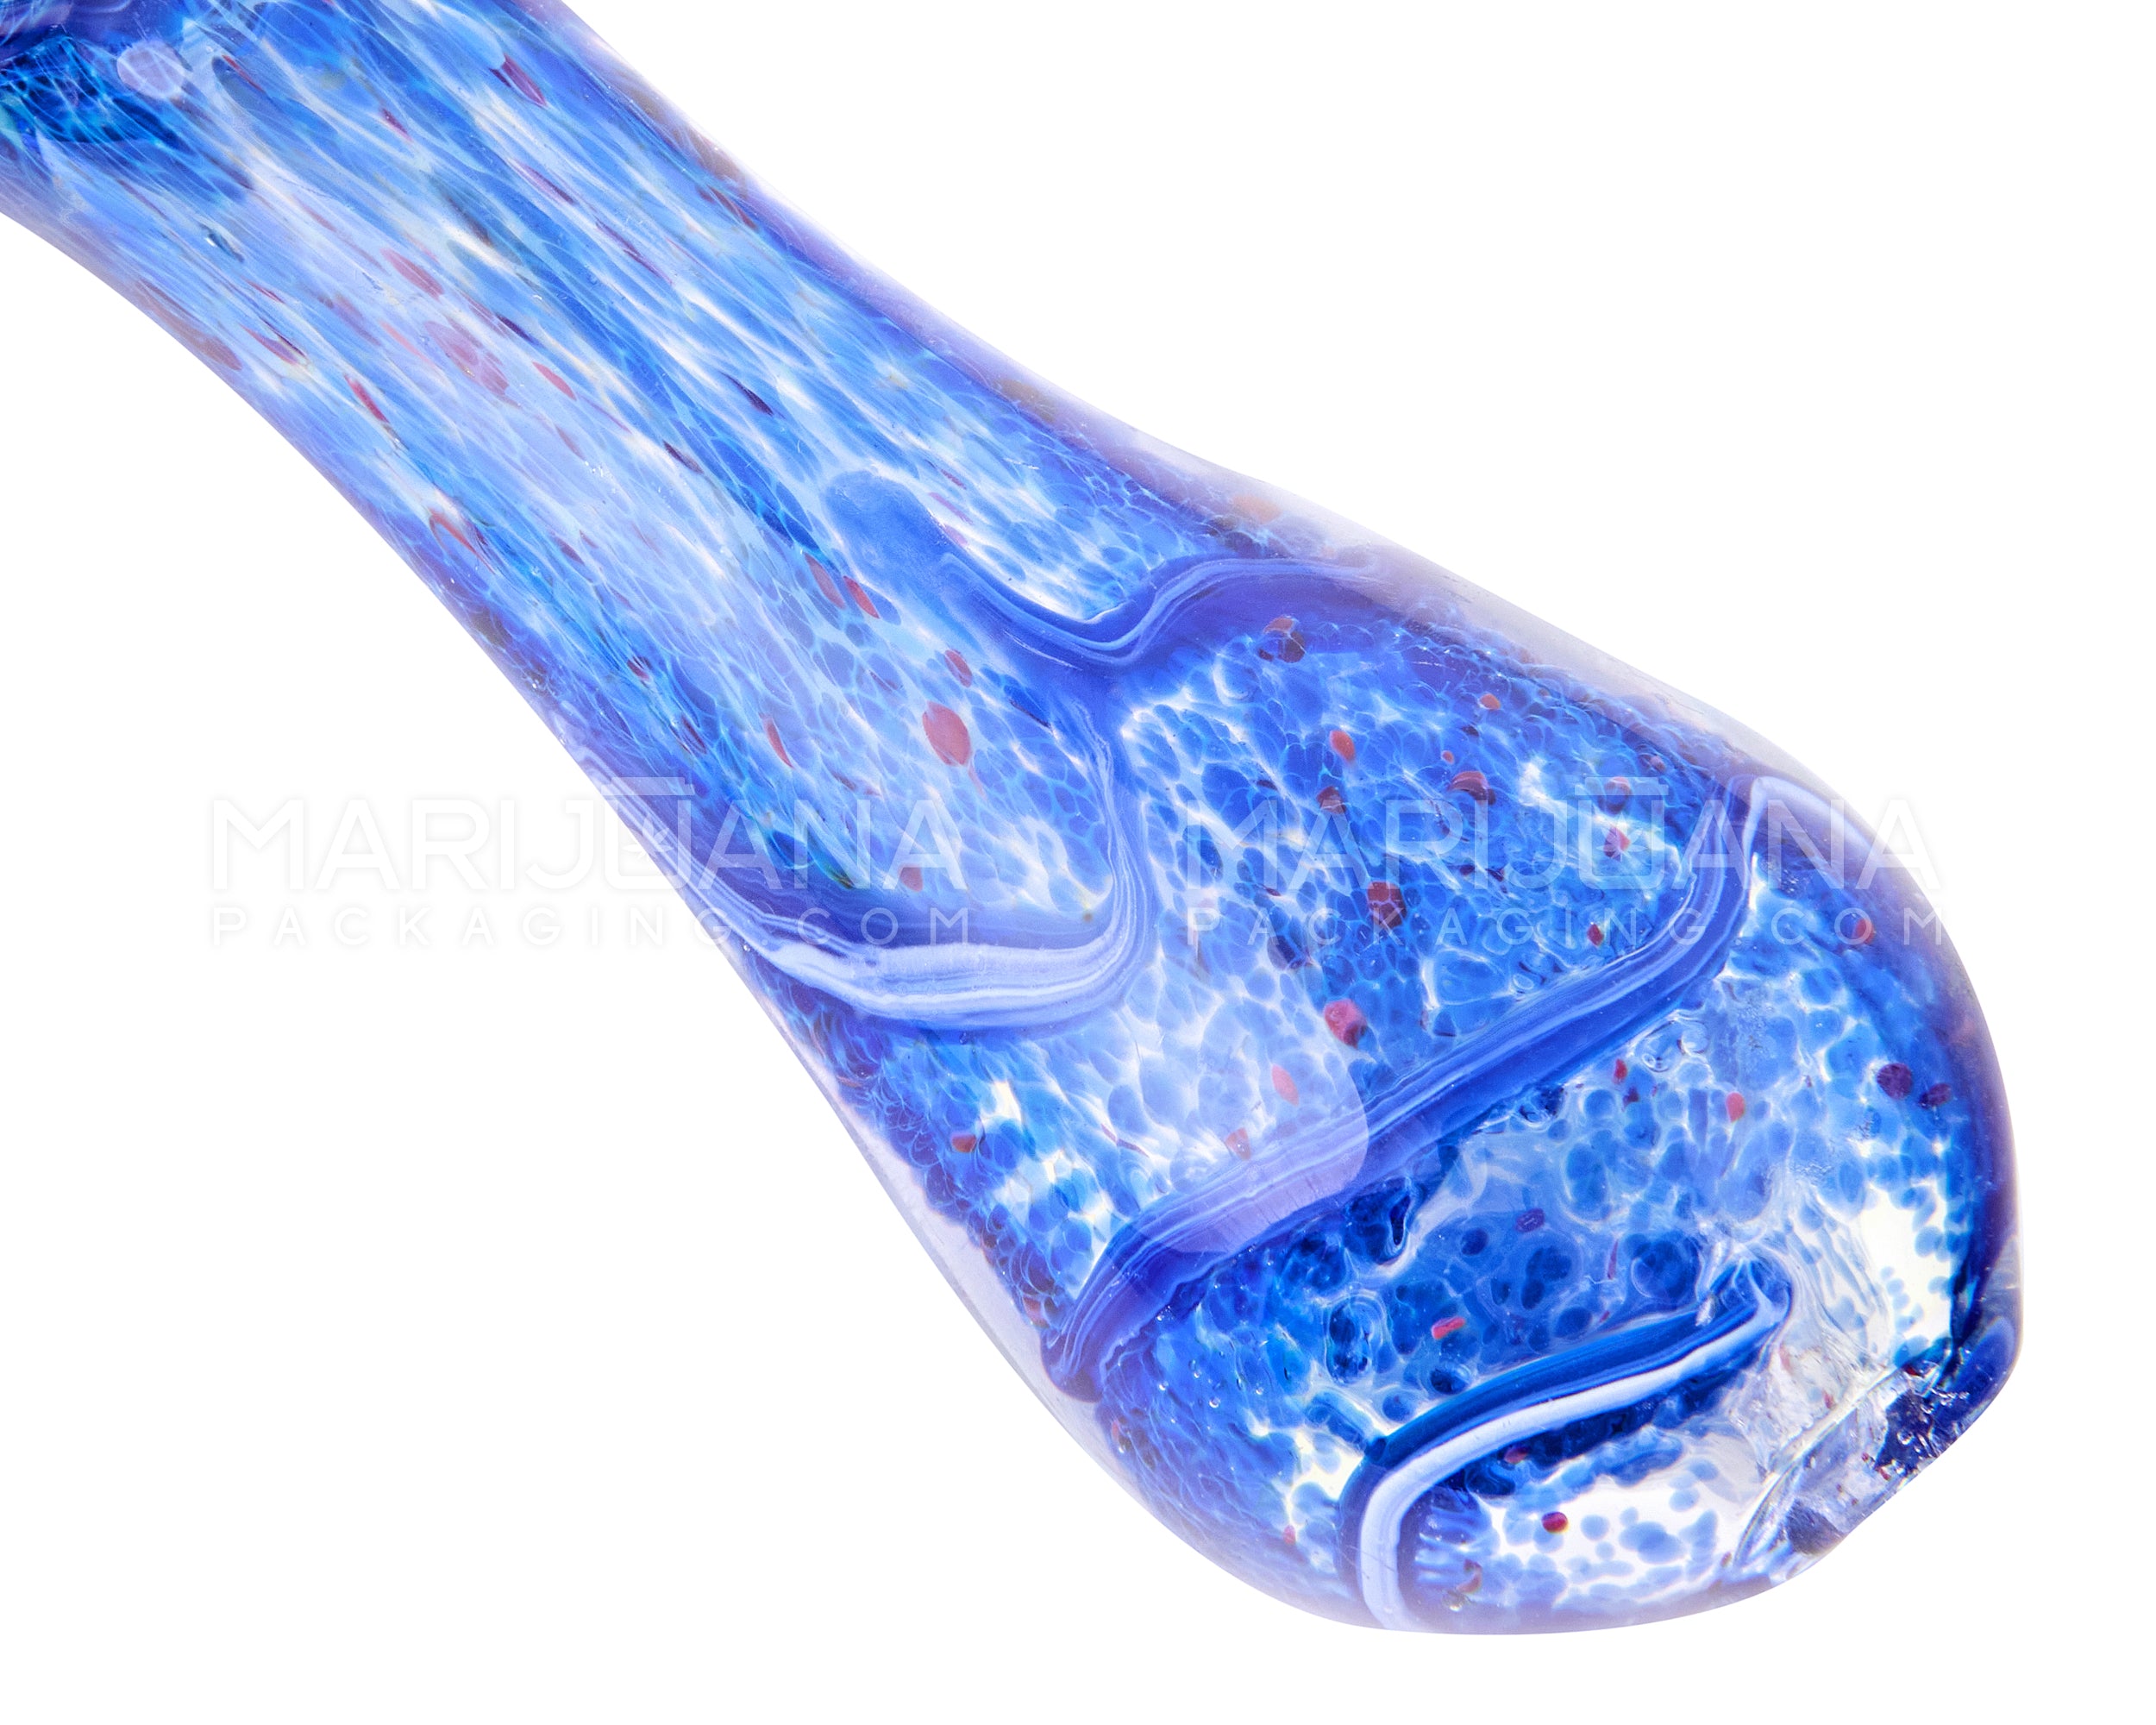 Frit & Fumed Spiral Spoon Hand Pipe w/ Triple Knockers | 4.5in Long - Glass - Assorted - 3